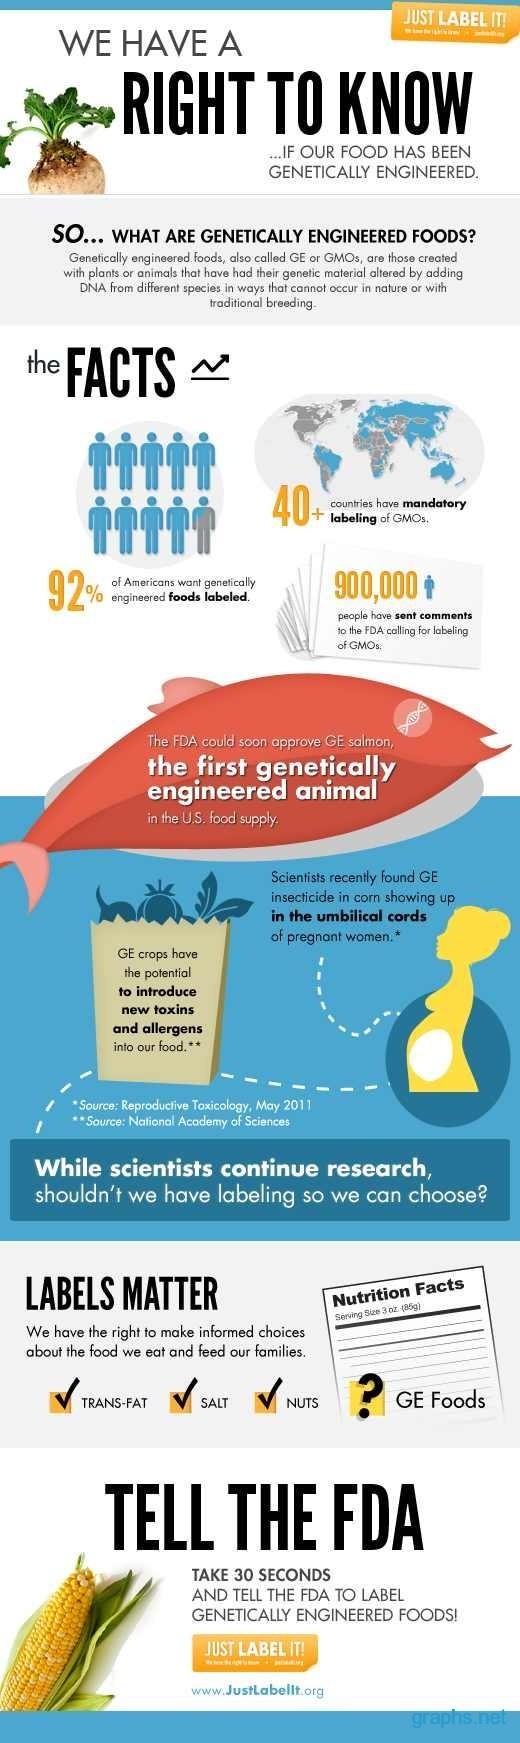 genetically engineered food facts